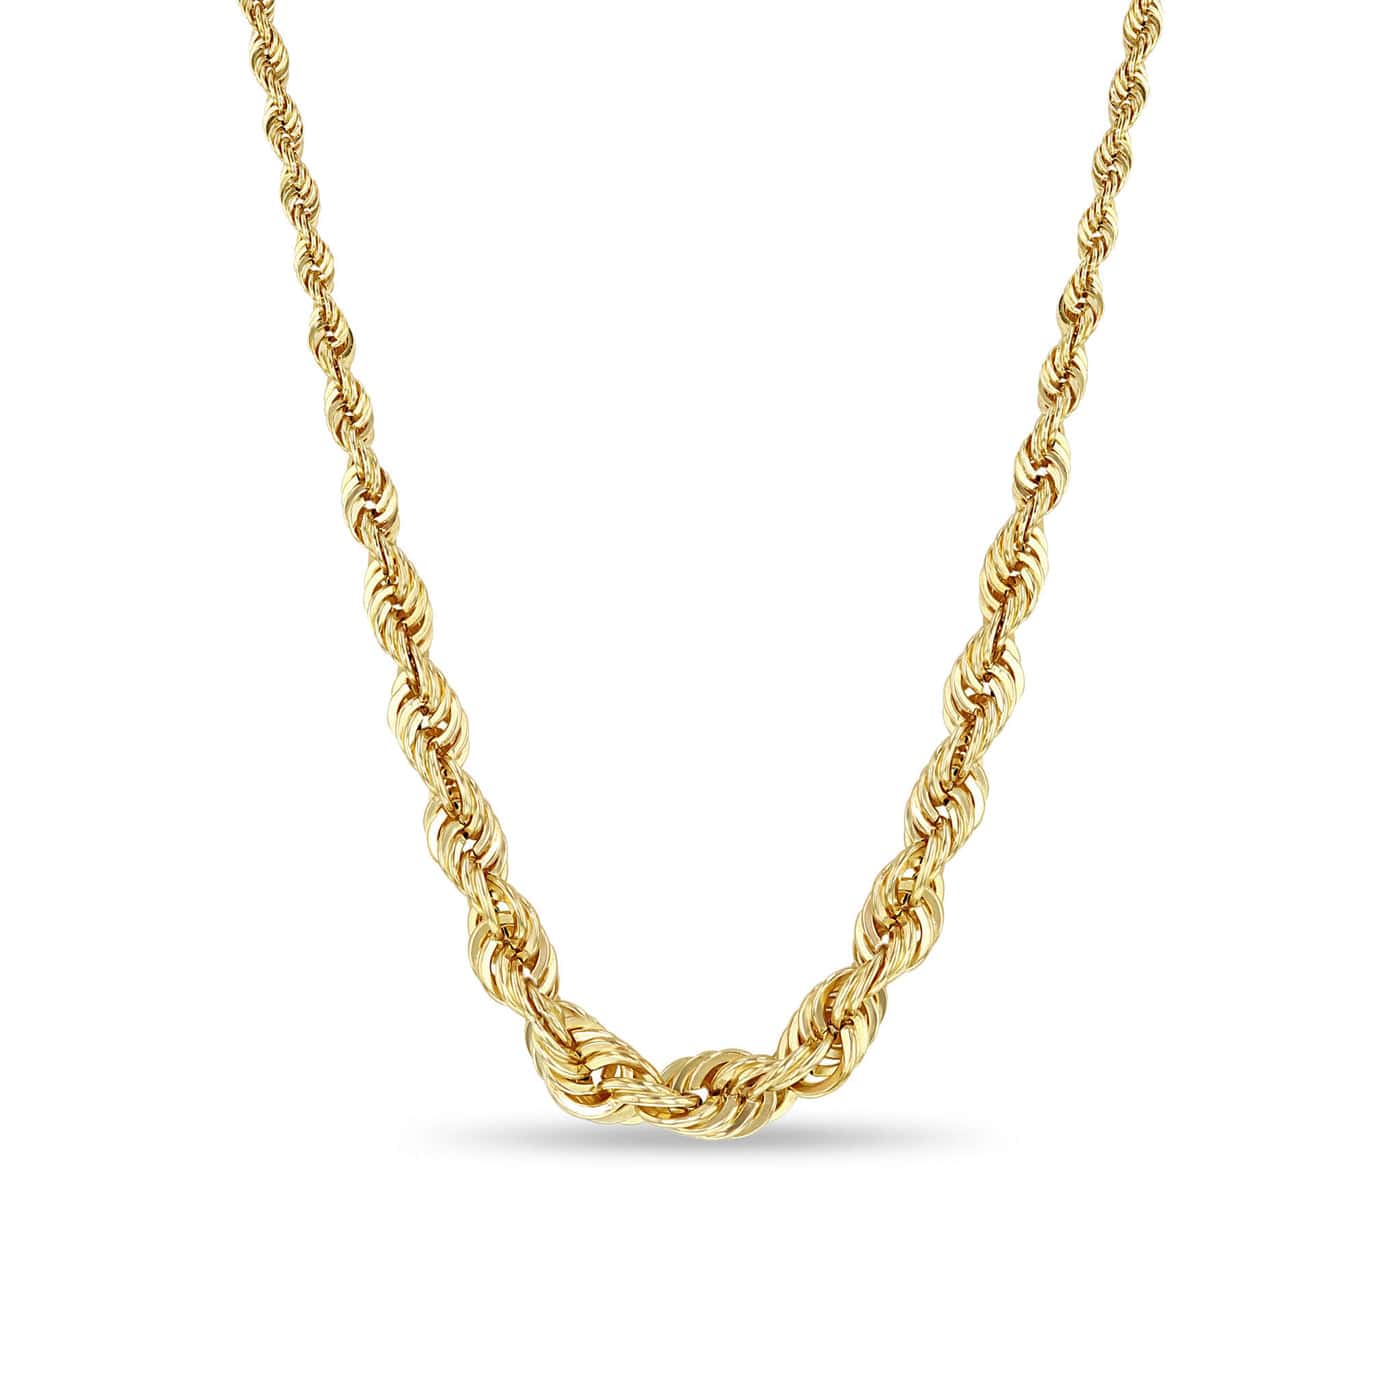 NKL-14K 14k Gold Graduated Rope Chain Necklace